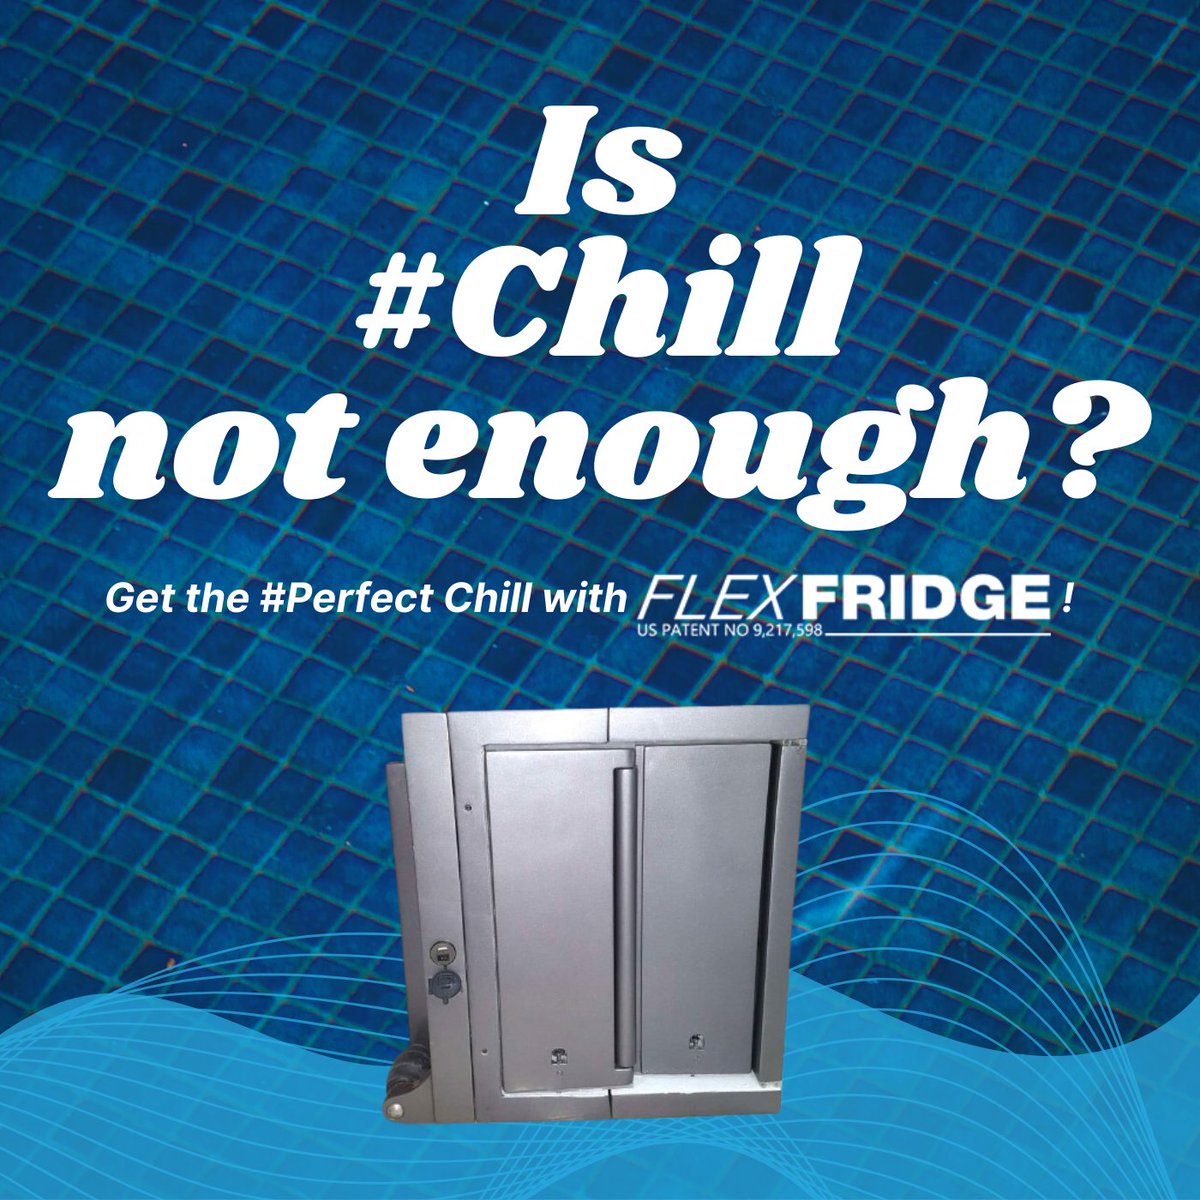 Is #chill not enough, and do you need the #PerfectChill? 🥶🥶🥶 FlexFridge comes with precise settings for precise temperature control at all times! ❄️❄️❄️
#FlexFridge #Chill #MiniFridge #SmartFridge